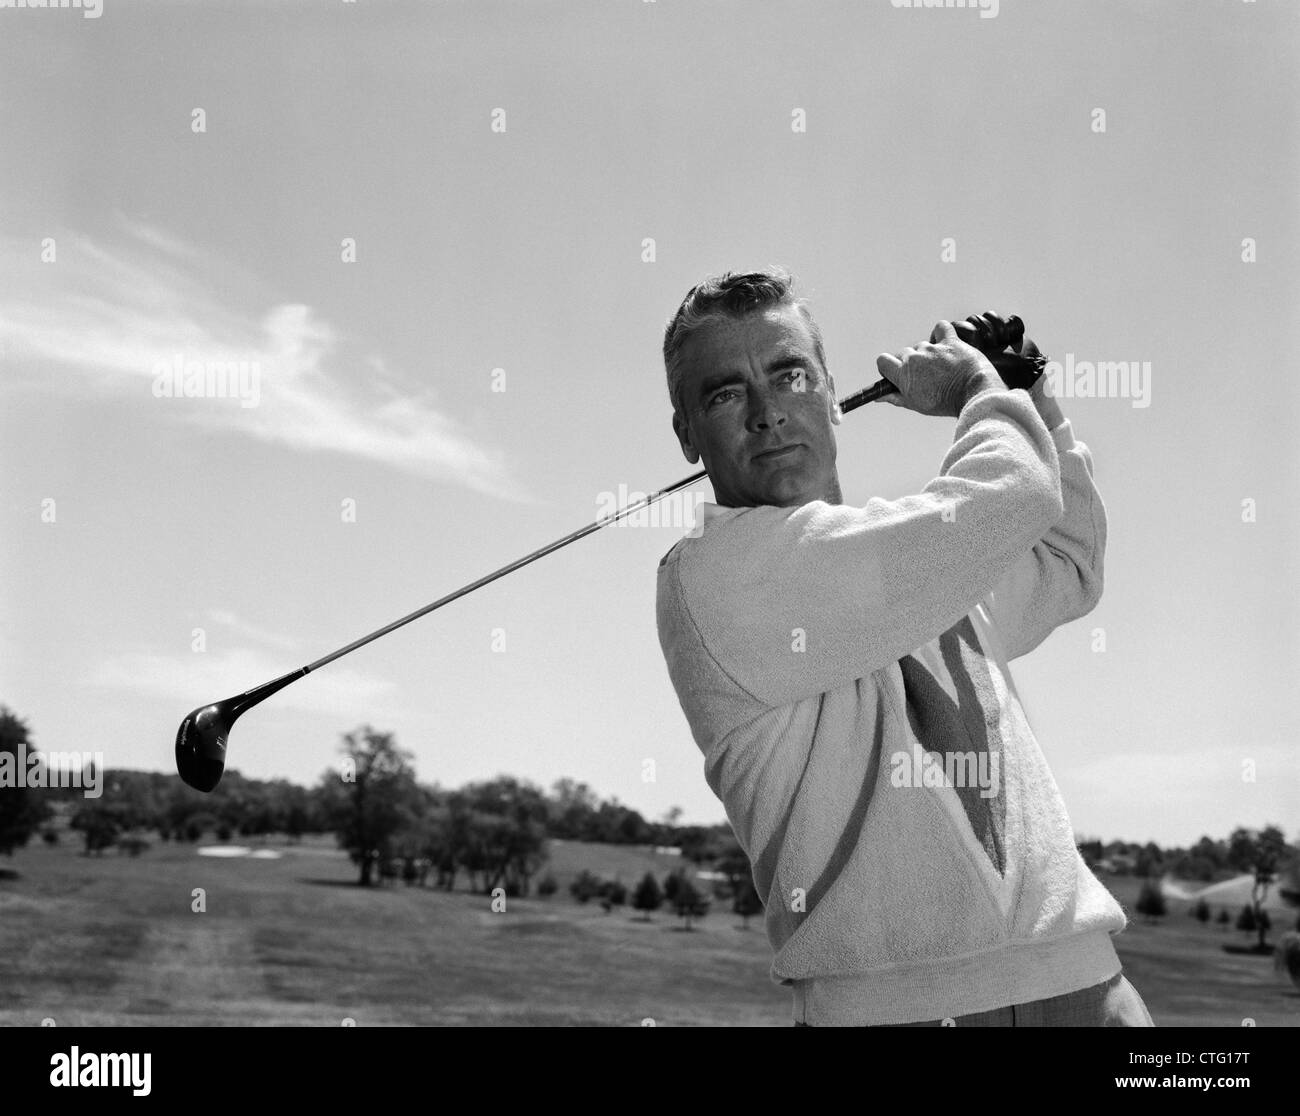 1960s MAN PLAYING GOLF TEEING-OFF GOLF BALL FROM TEE WITH DRIVER OUTDOOR  Stock Photo - Alamy